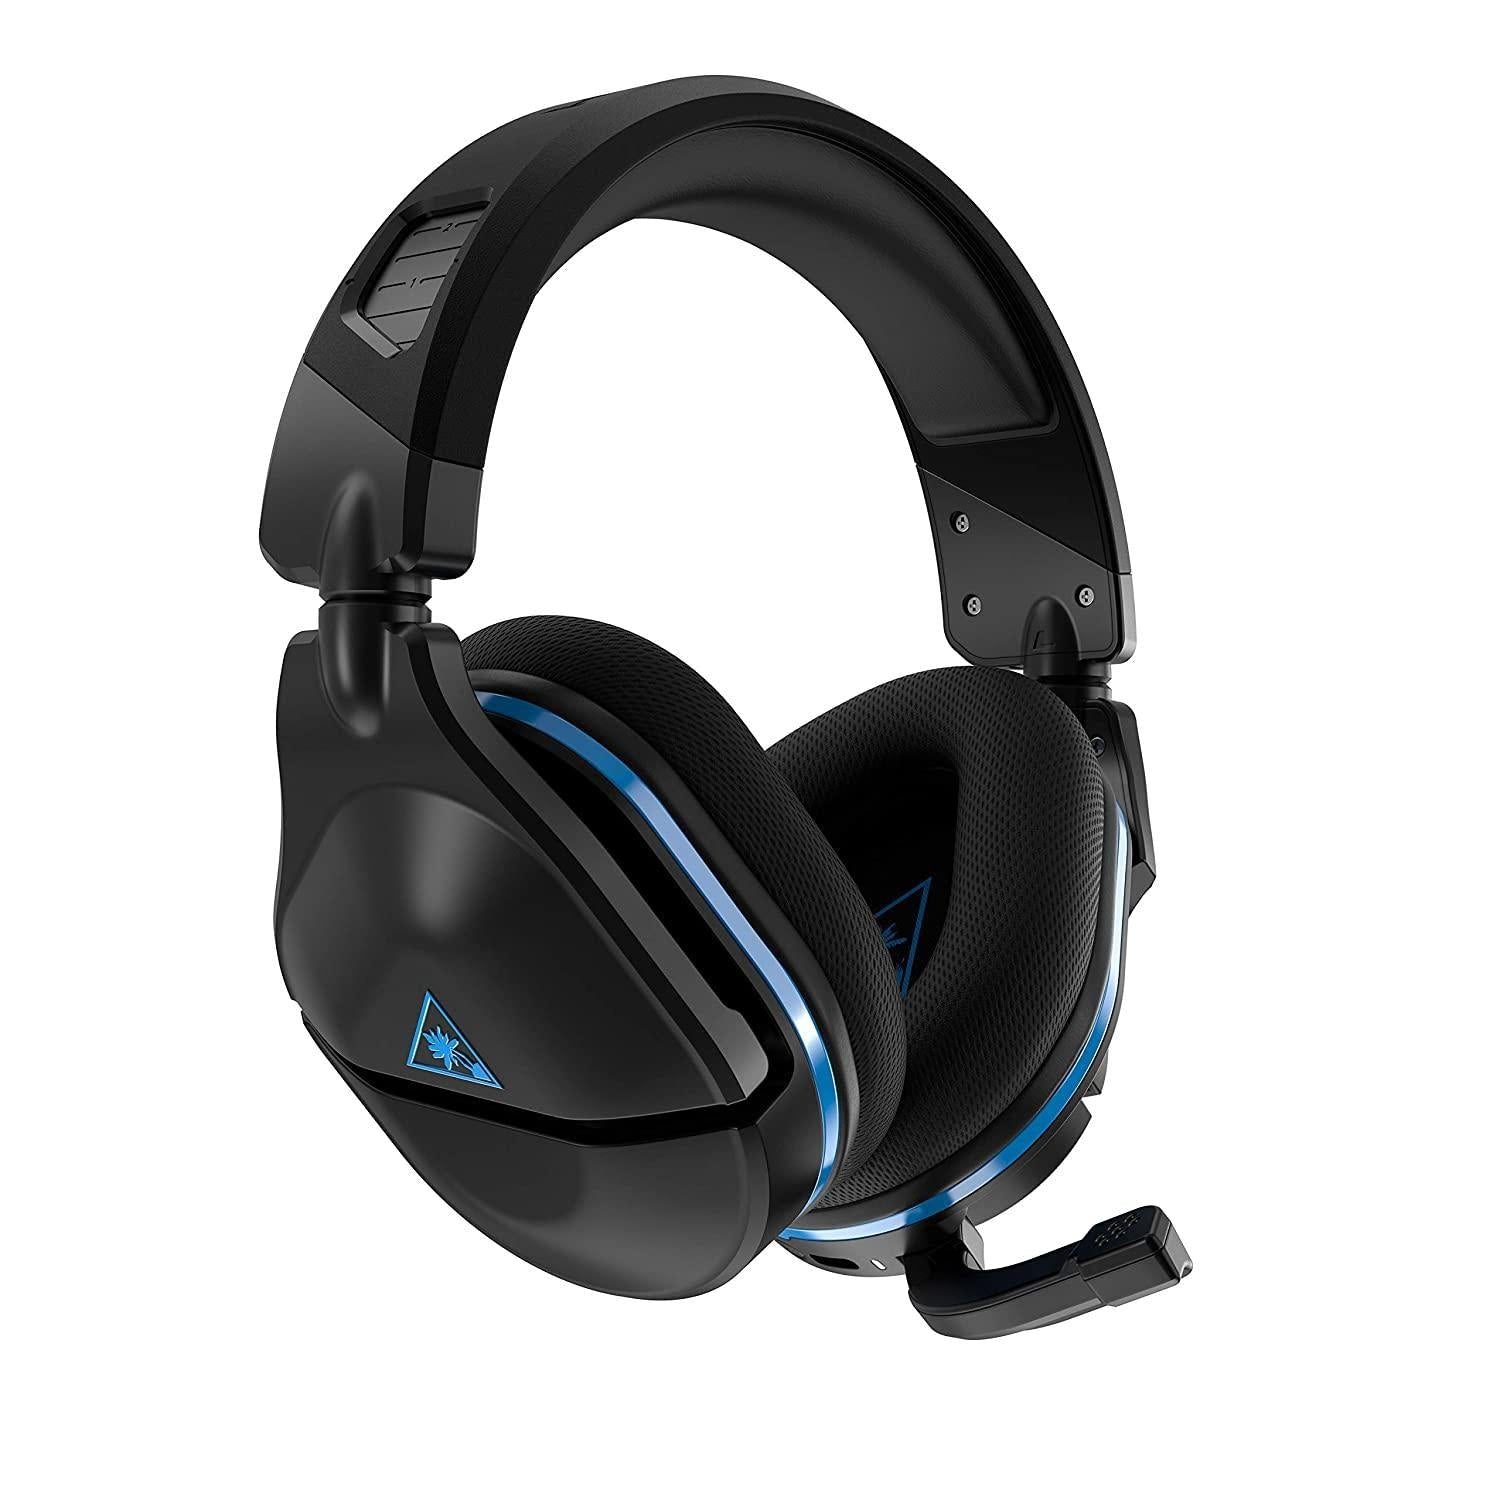 Turtle Beach Store Turtle Beach Stealth 600 Gen 2 Wireless Gaming Headset for PlayStation 5 and PlayStation 4 - Store For Gamers